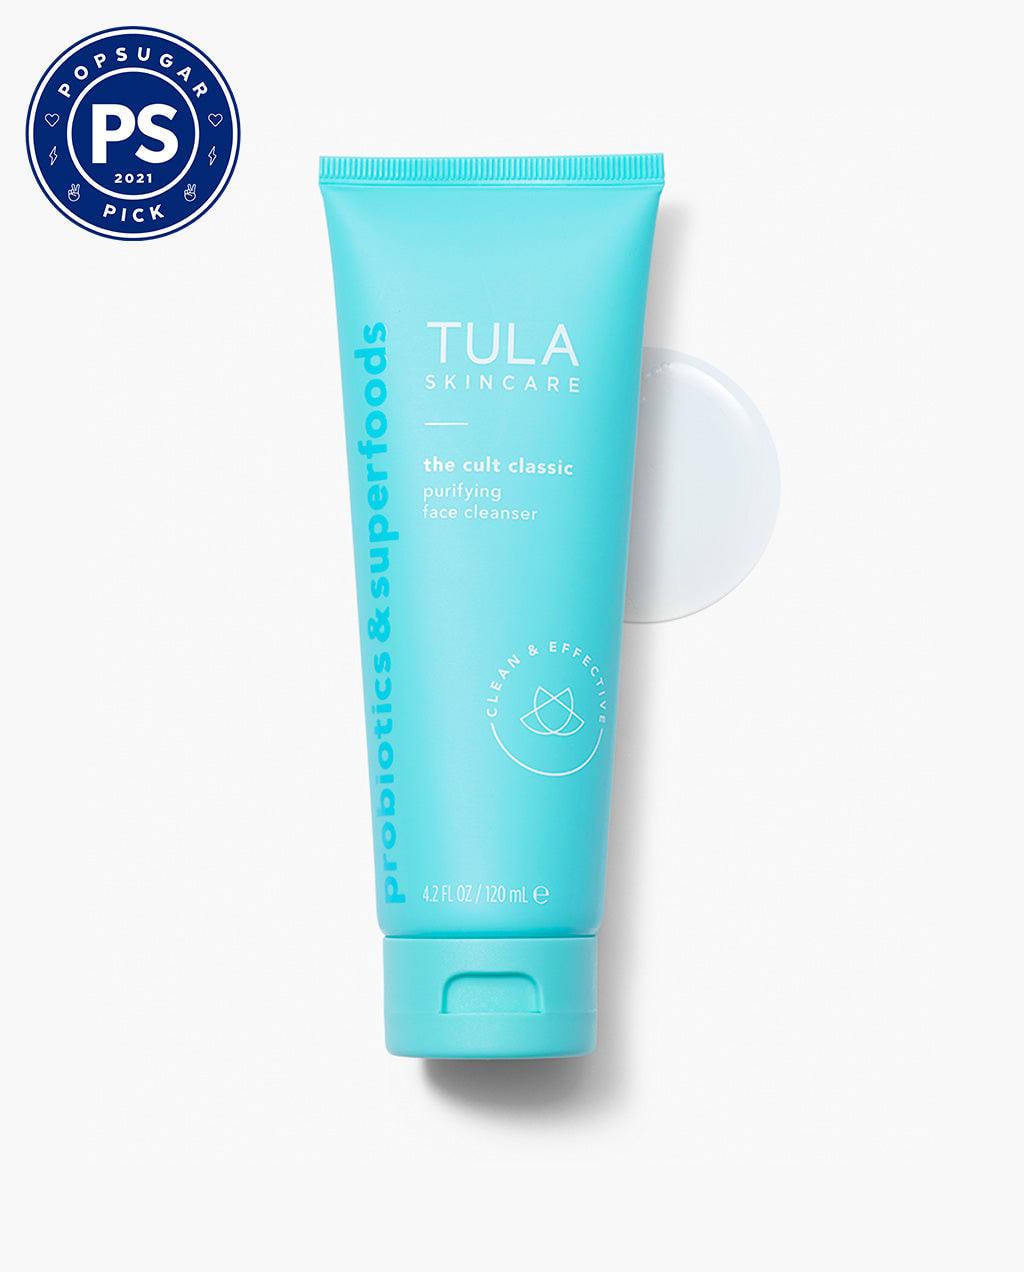 Tula Skin Care The Cult Classic Purifying Face Cleanser